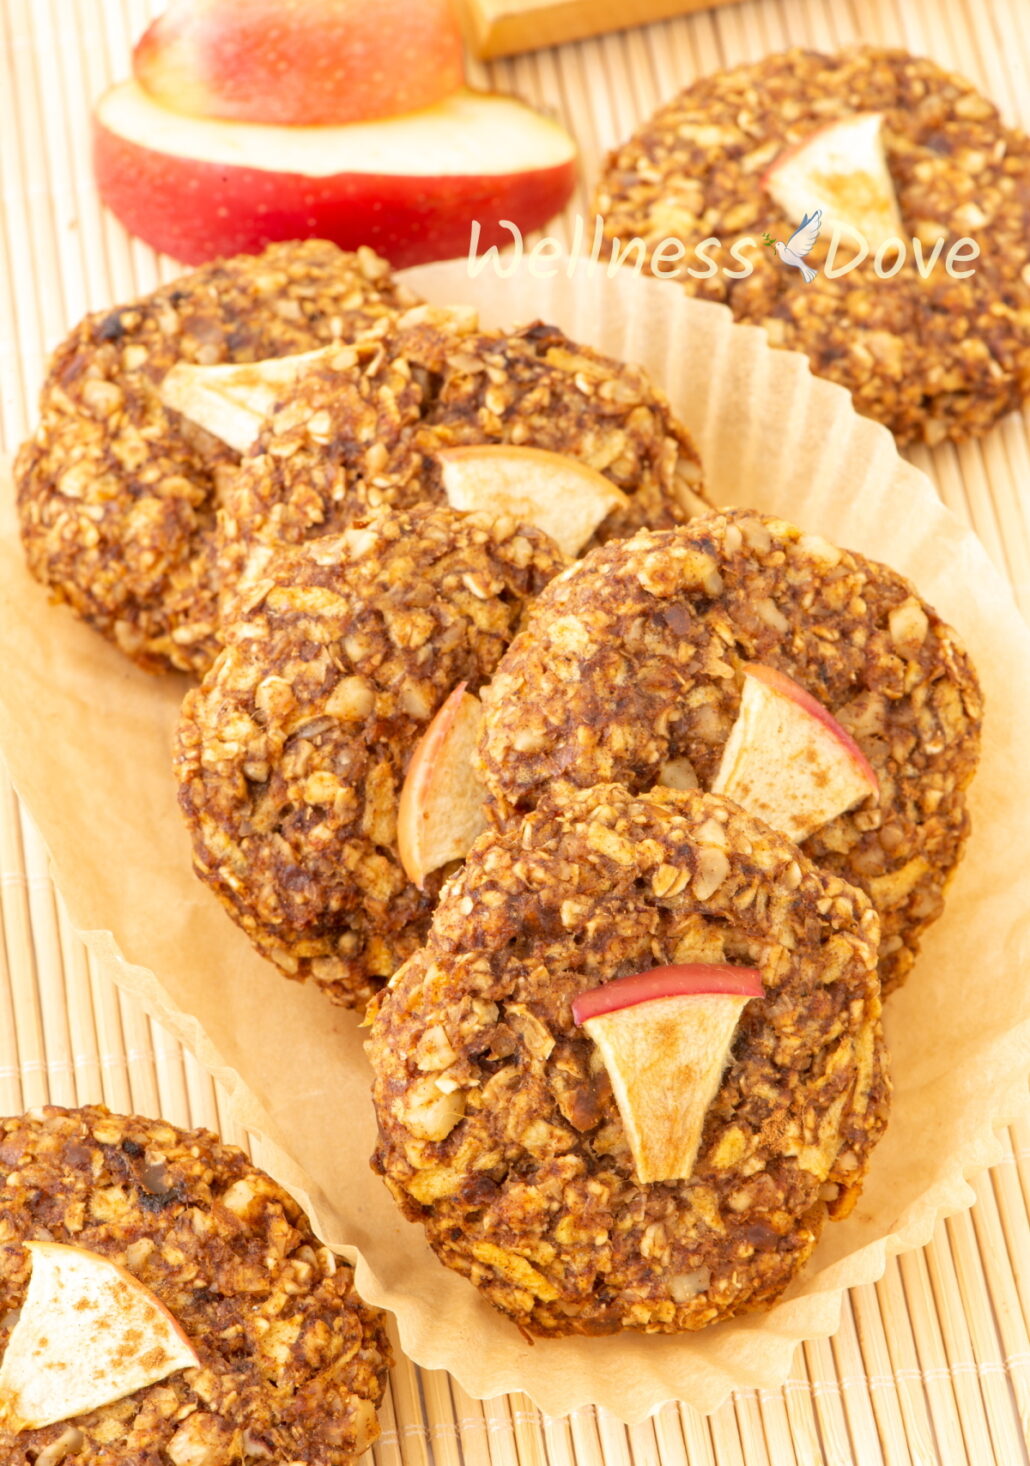 the Apple Oatmeal Vegan Breakfast Cookies in a parchment paper tray.